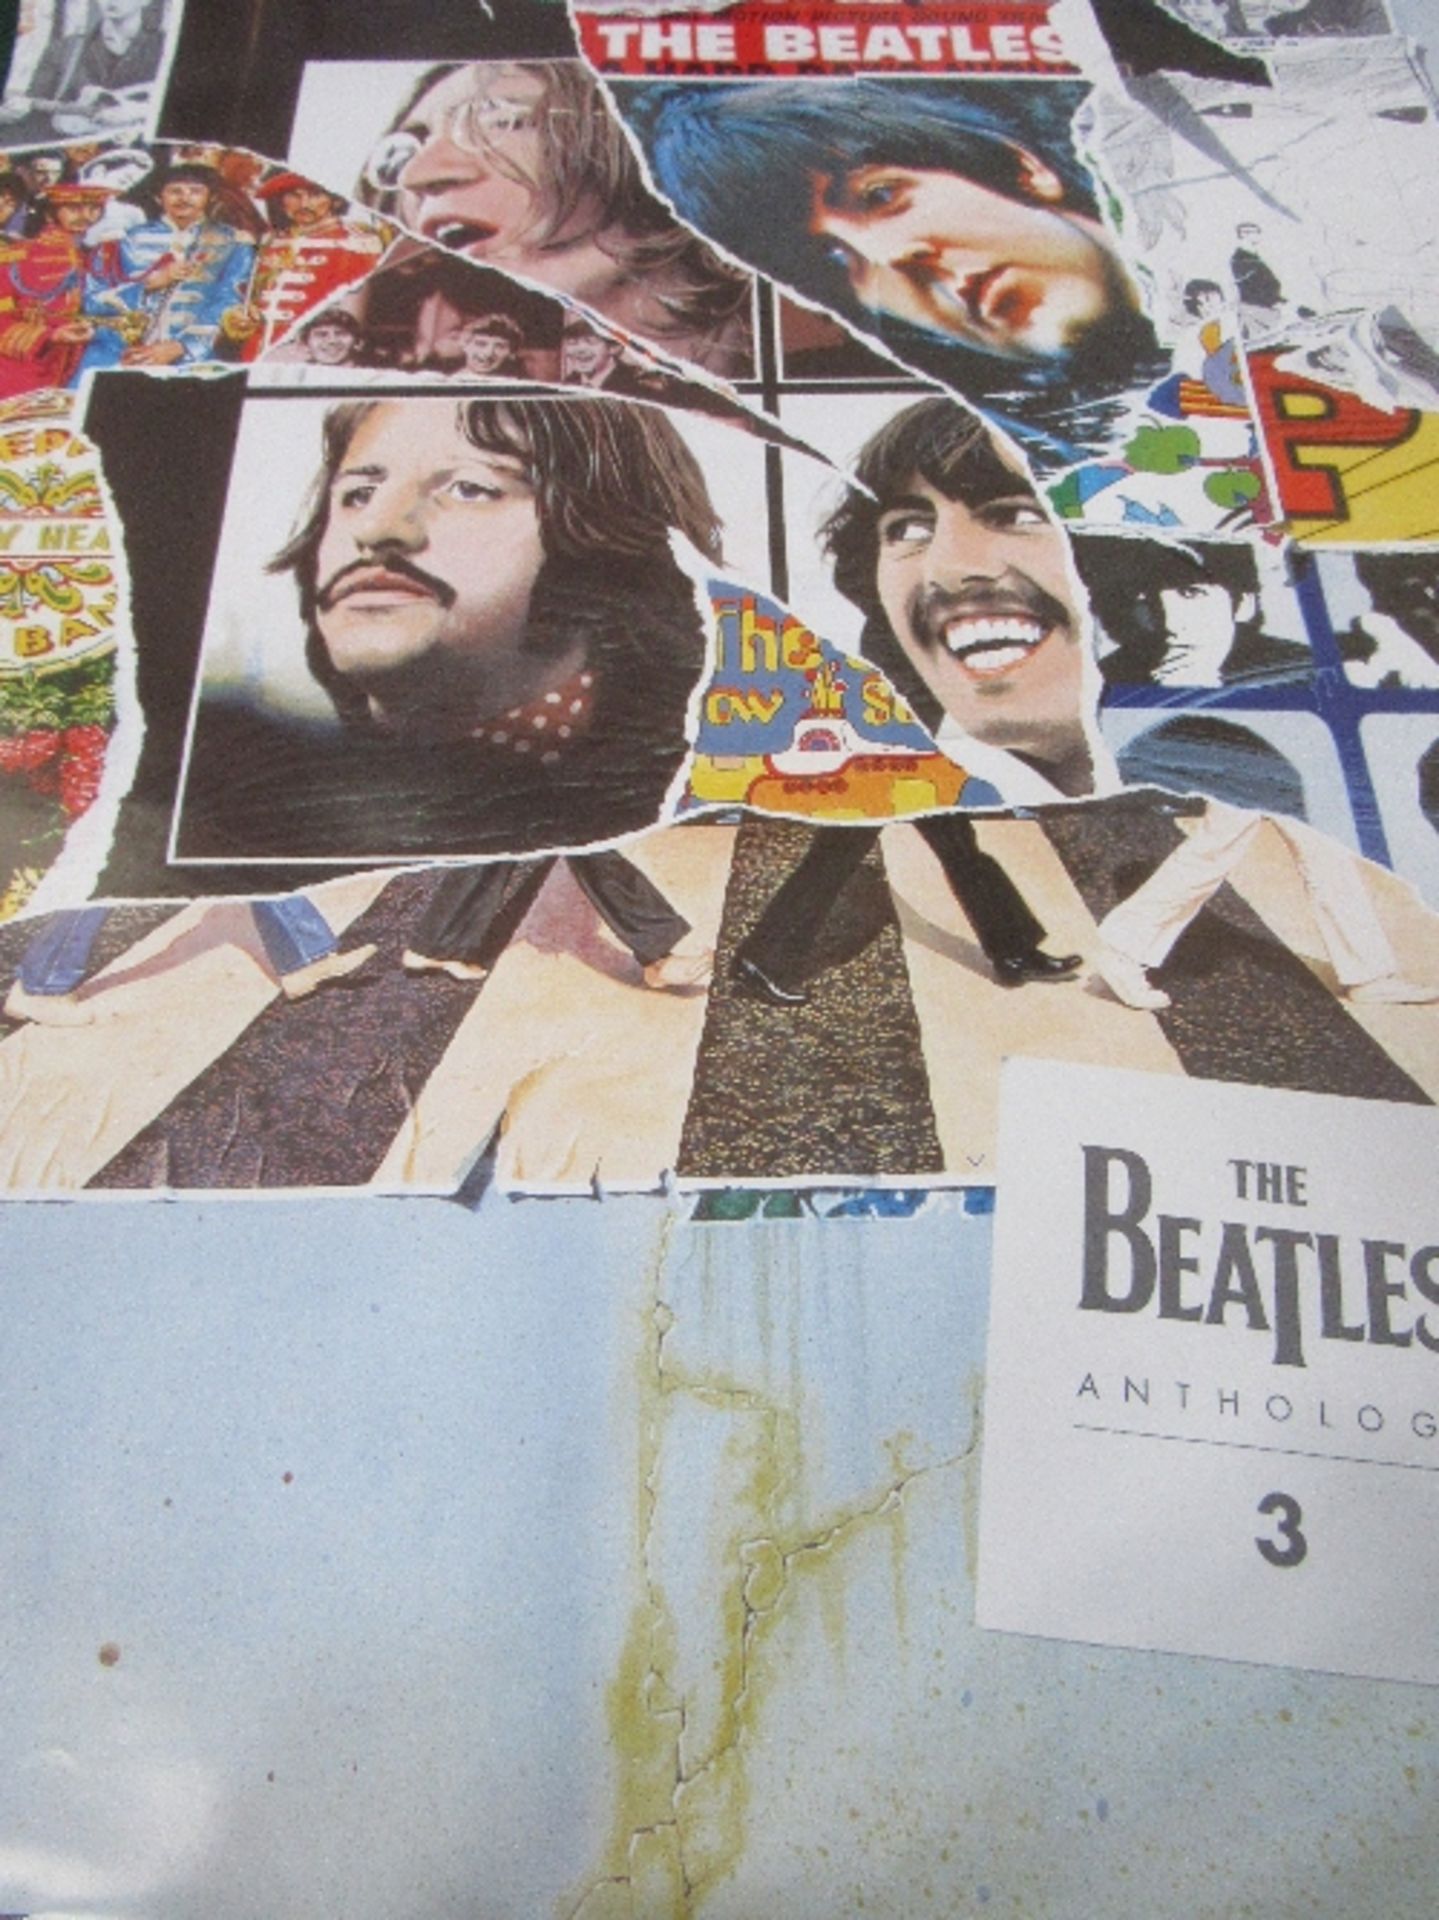 4 Beatles Anthology posters including un-issued Anthology 3 poster. Estimate £20-30. - Image 5 of 5